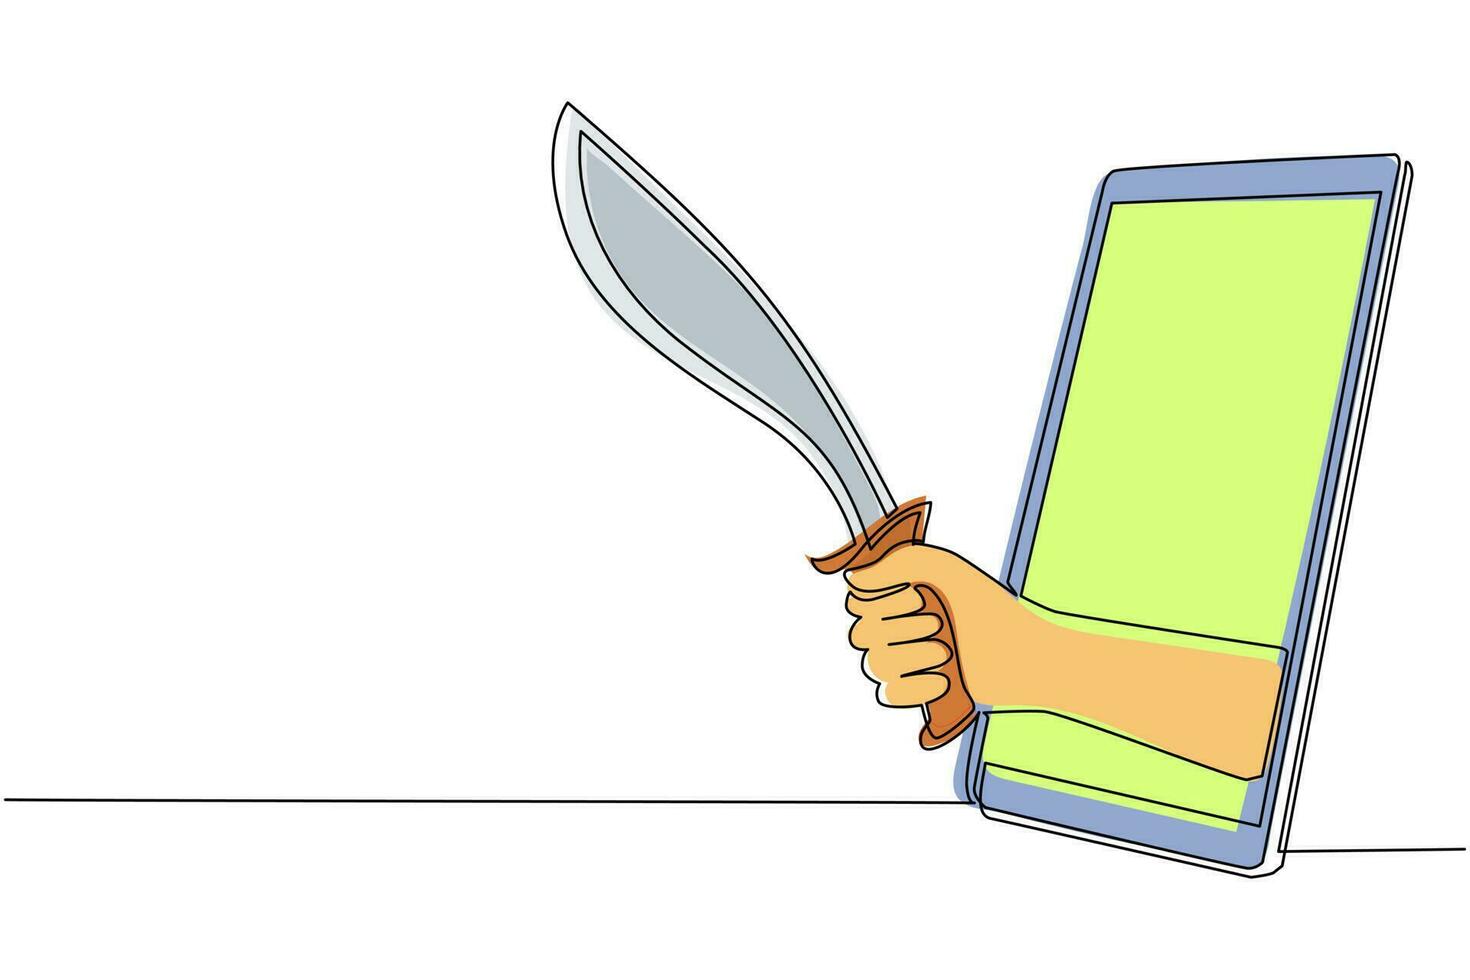 Continuous one line drawing hand hold machetes knife with curved blade through mobile phone. Concept of mobile games, e-sport, entertainment application for smartphones. Single line draw design vector